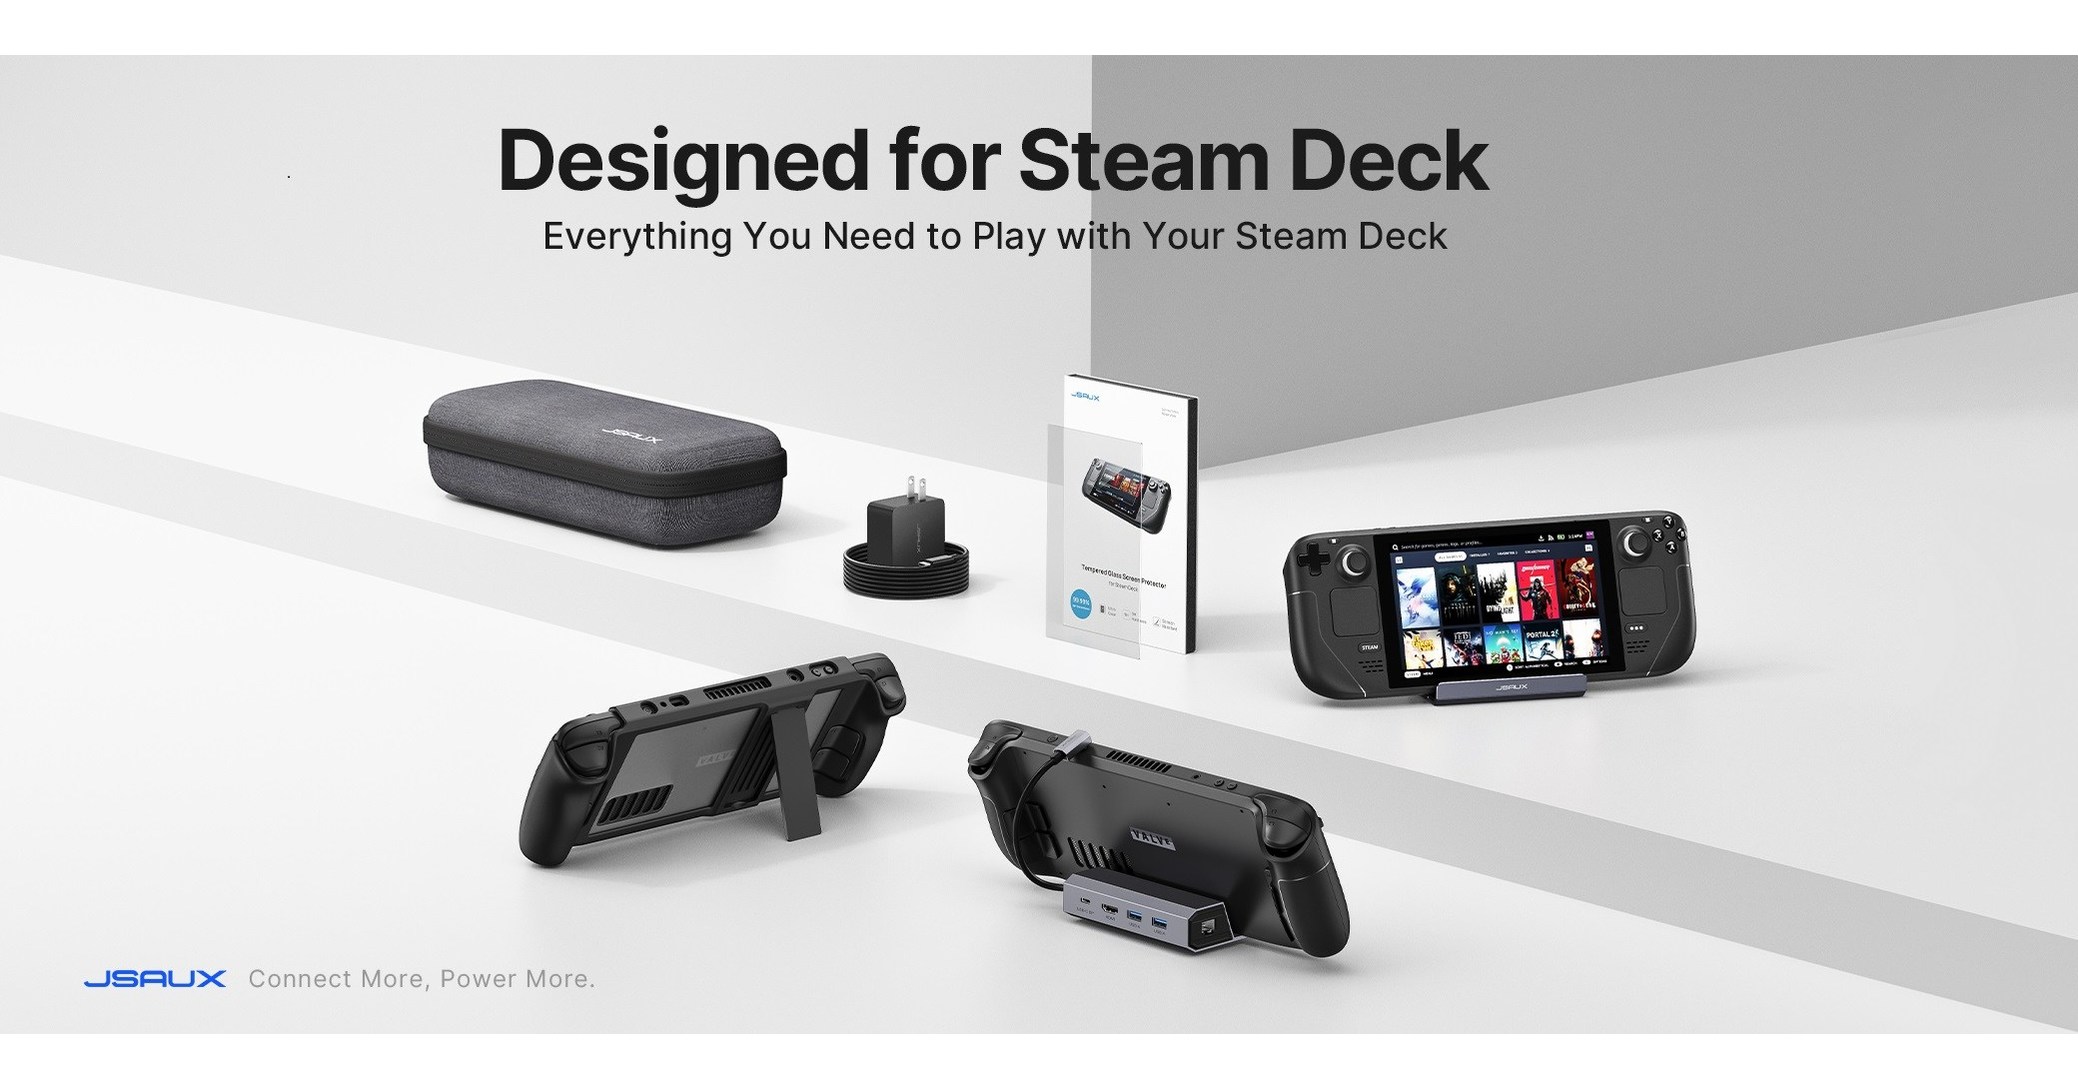 JSAUX Takes The Lead In Steam Deck Accessories